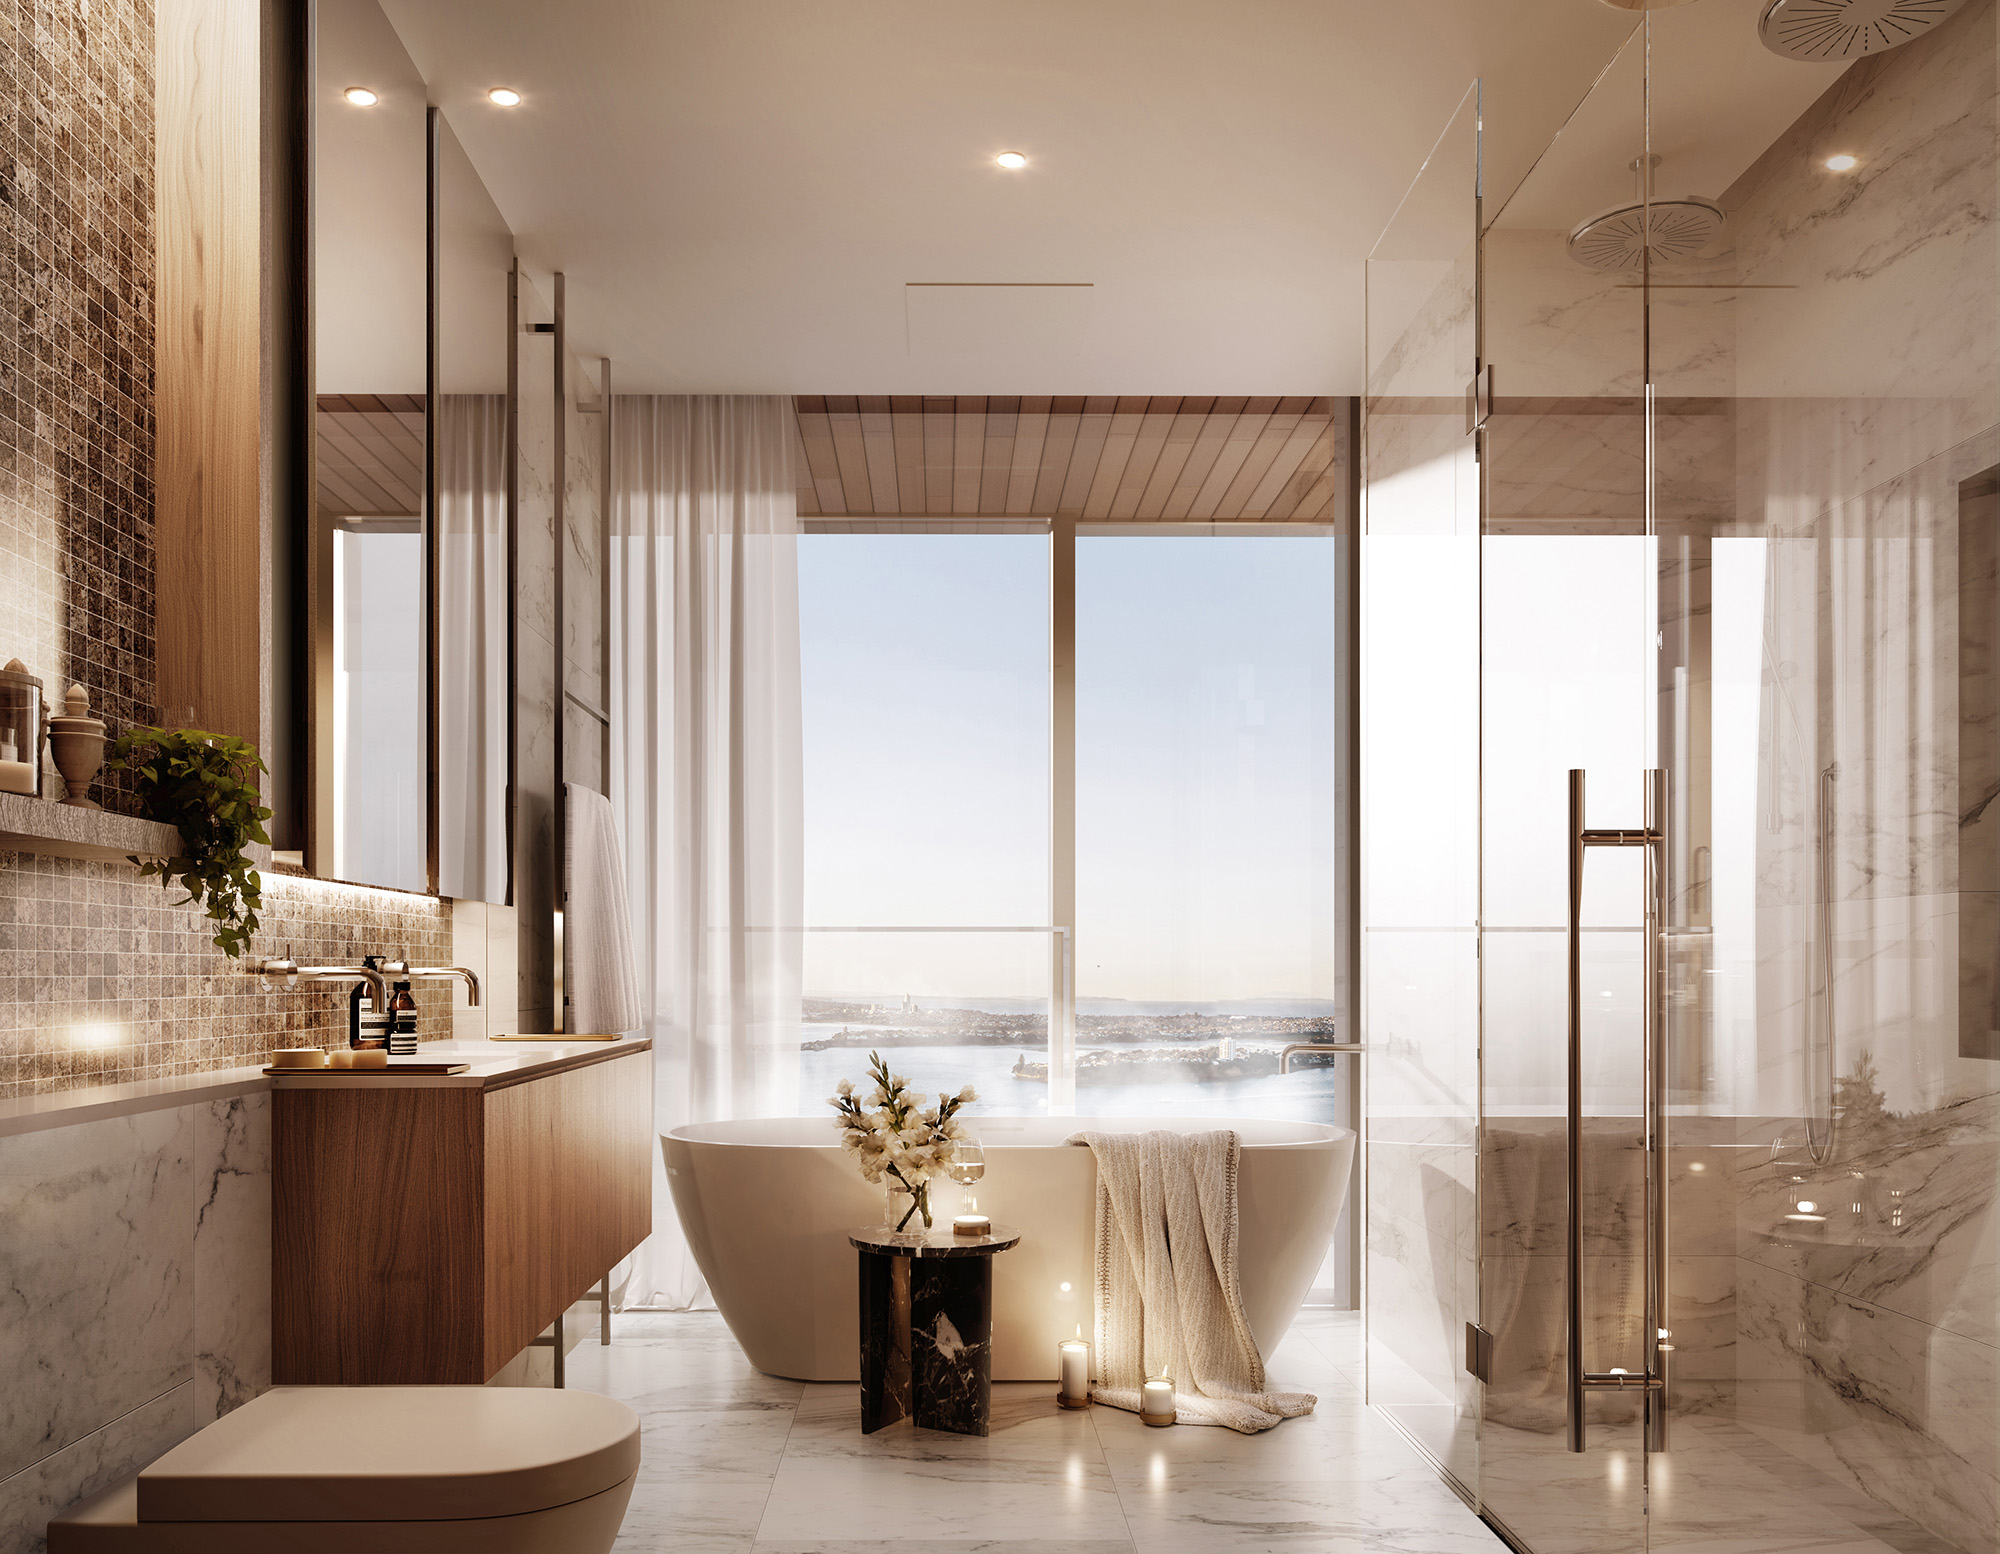  The ensuite features a double vanity, double shower and freestanding bath with views to the harbour beyond. 